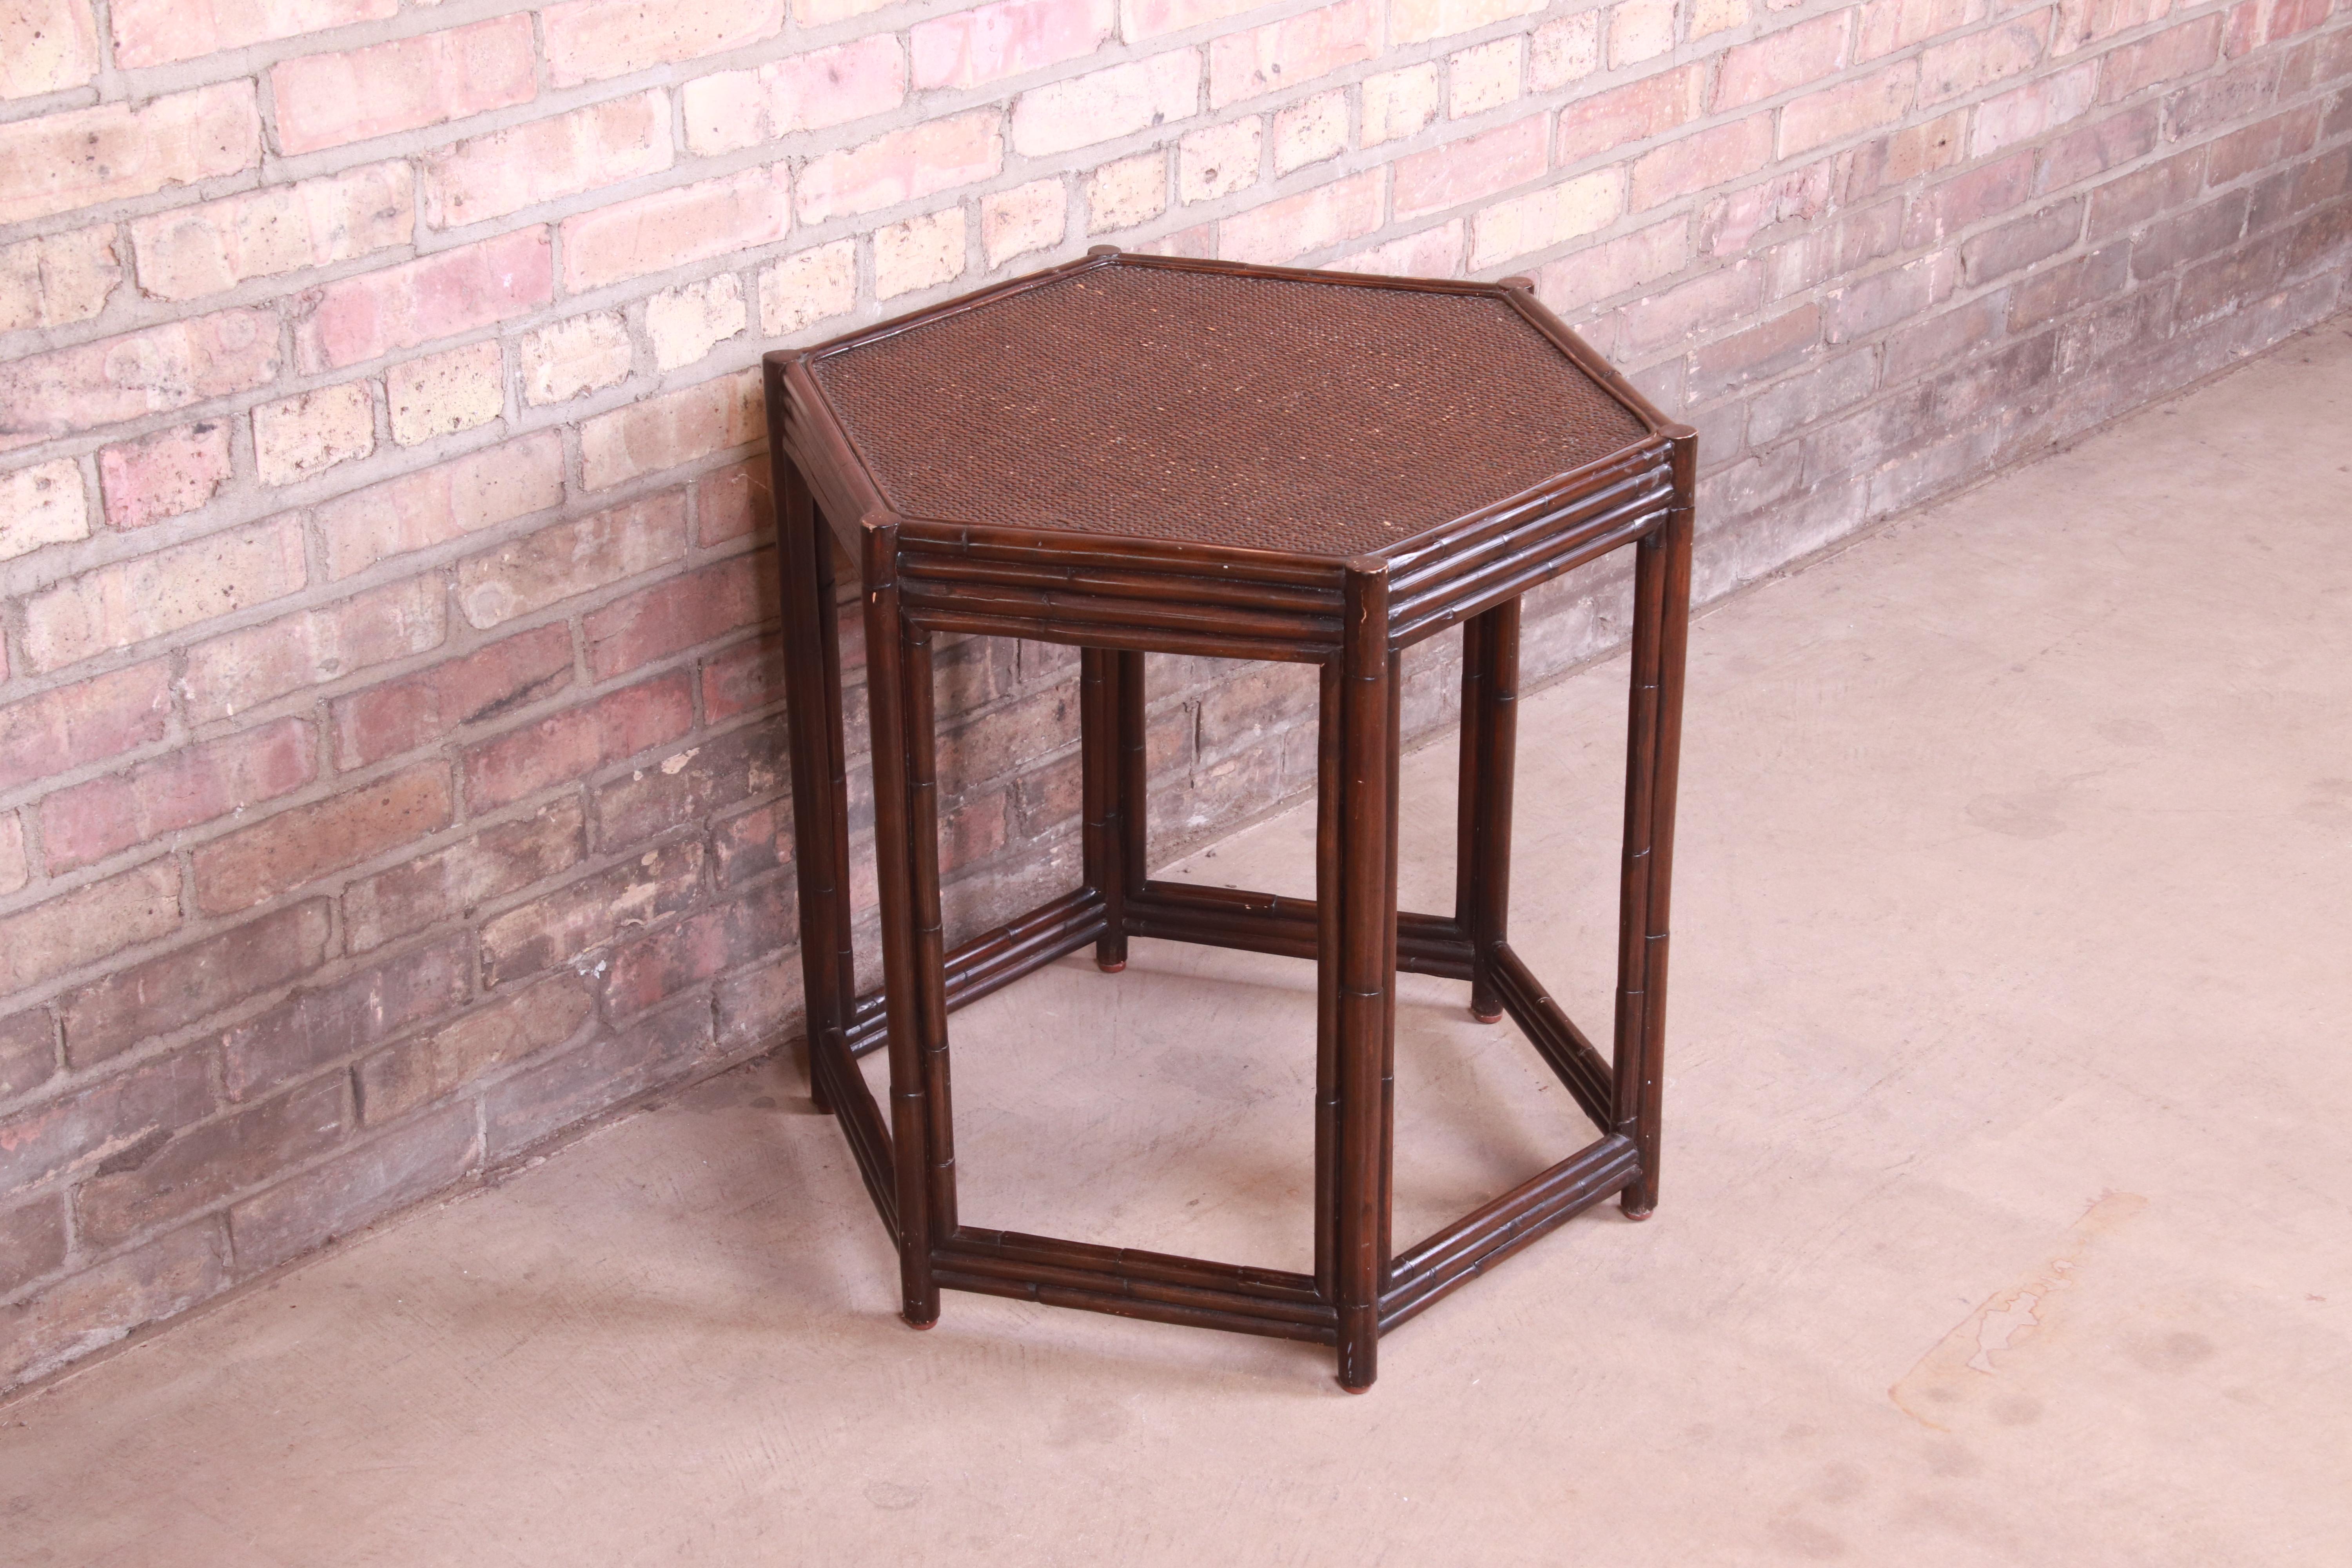 Maitland Smith Style Bamboo Rattan Hexagonal Tea Table In Good Condition For Sale In South Bend, IN